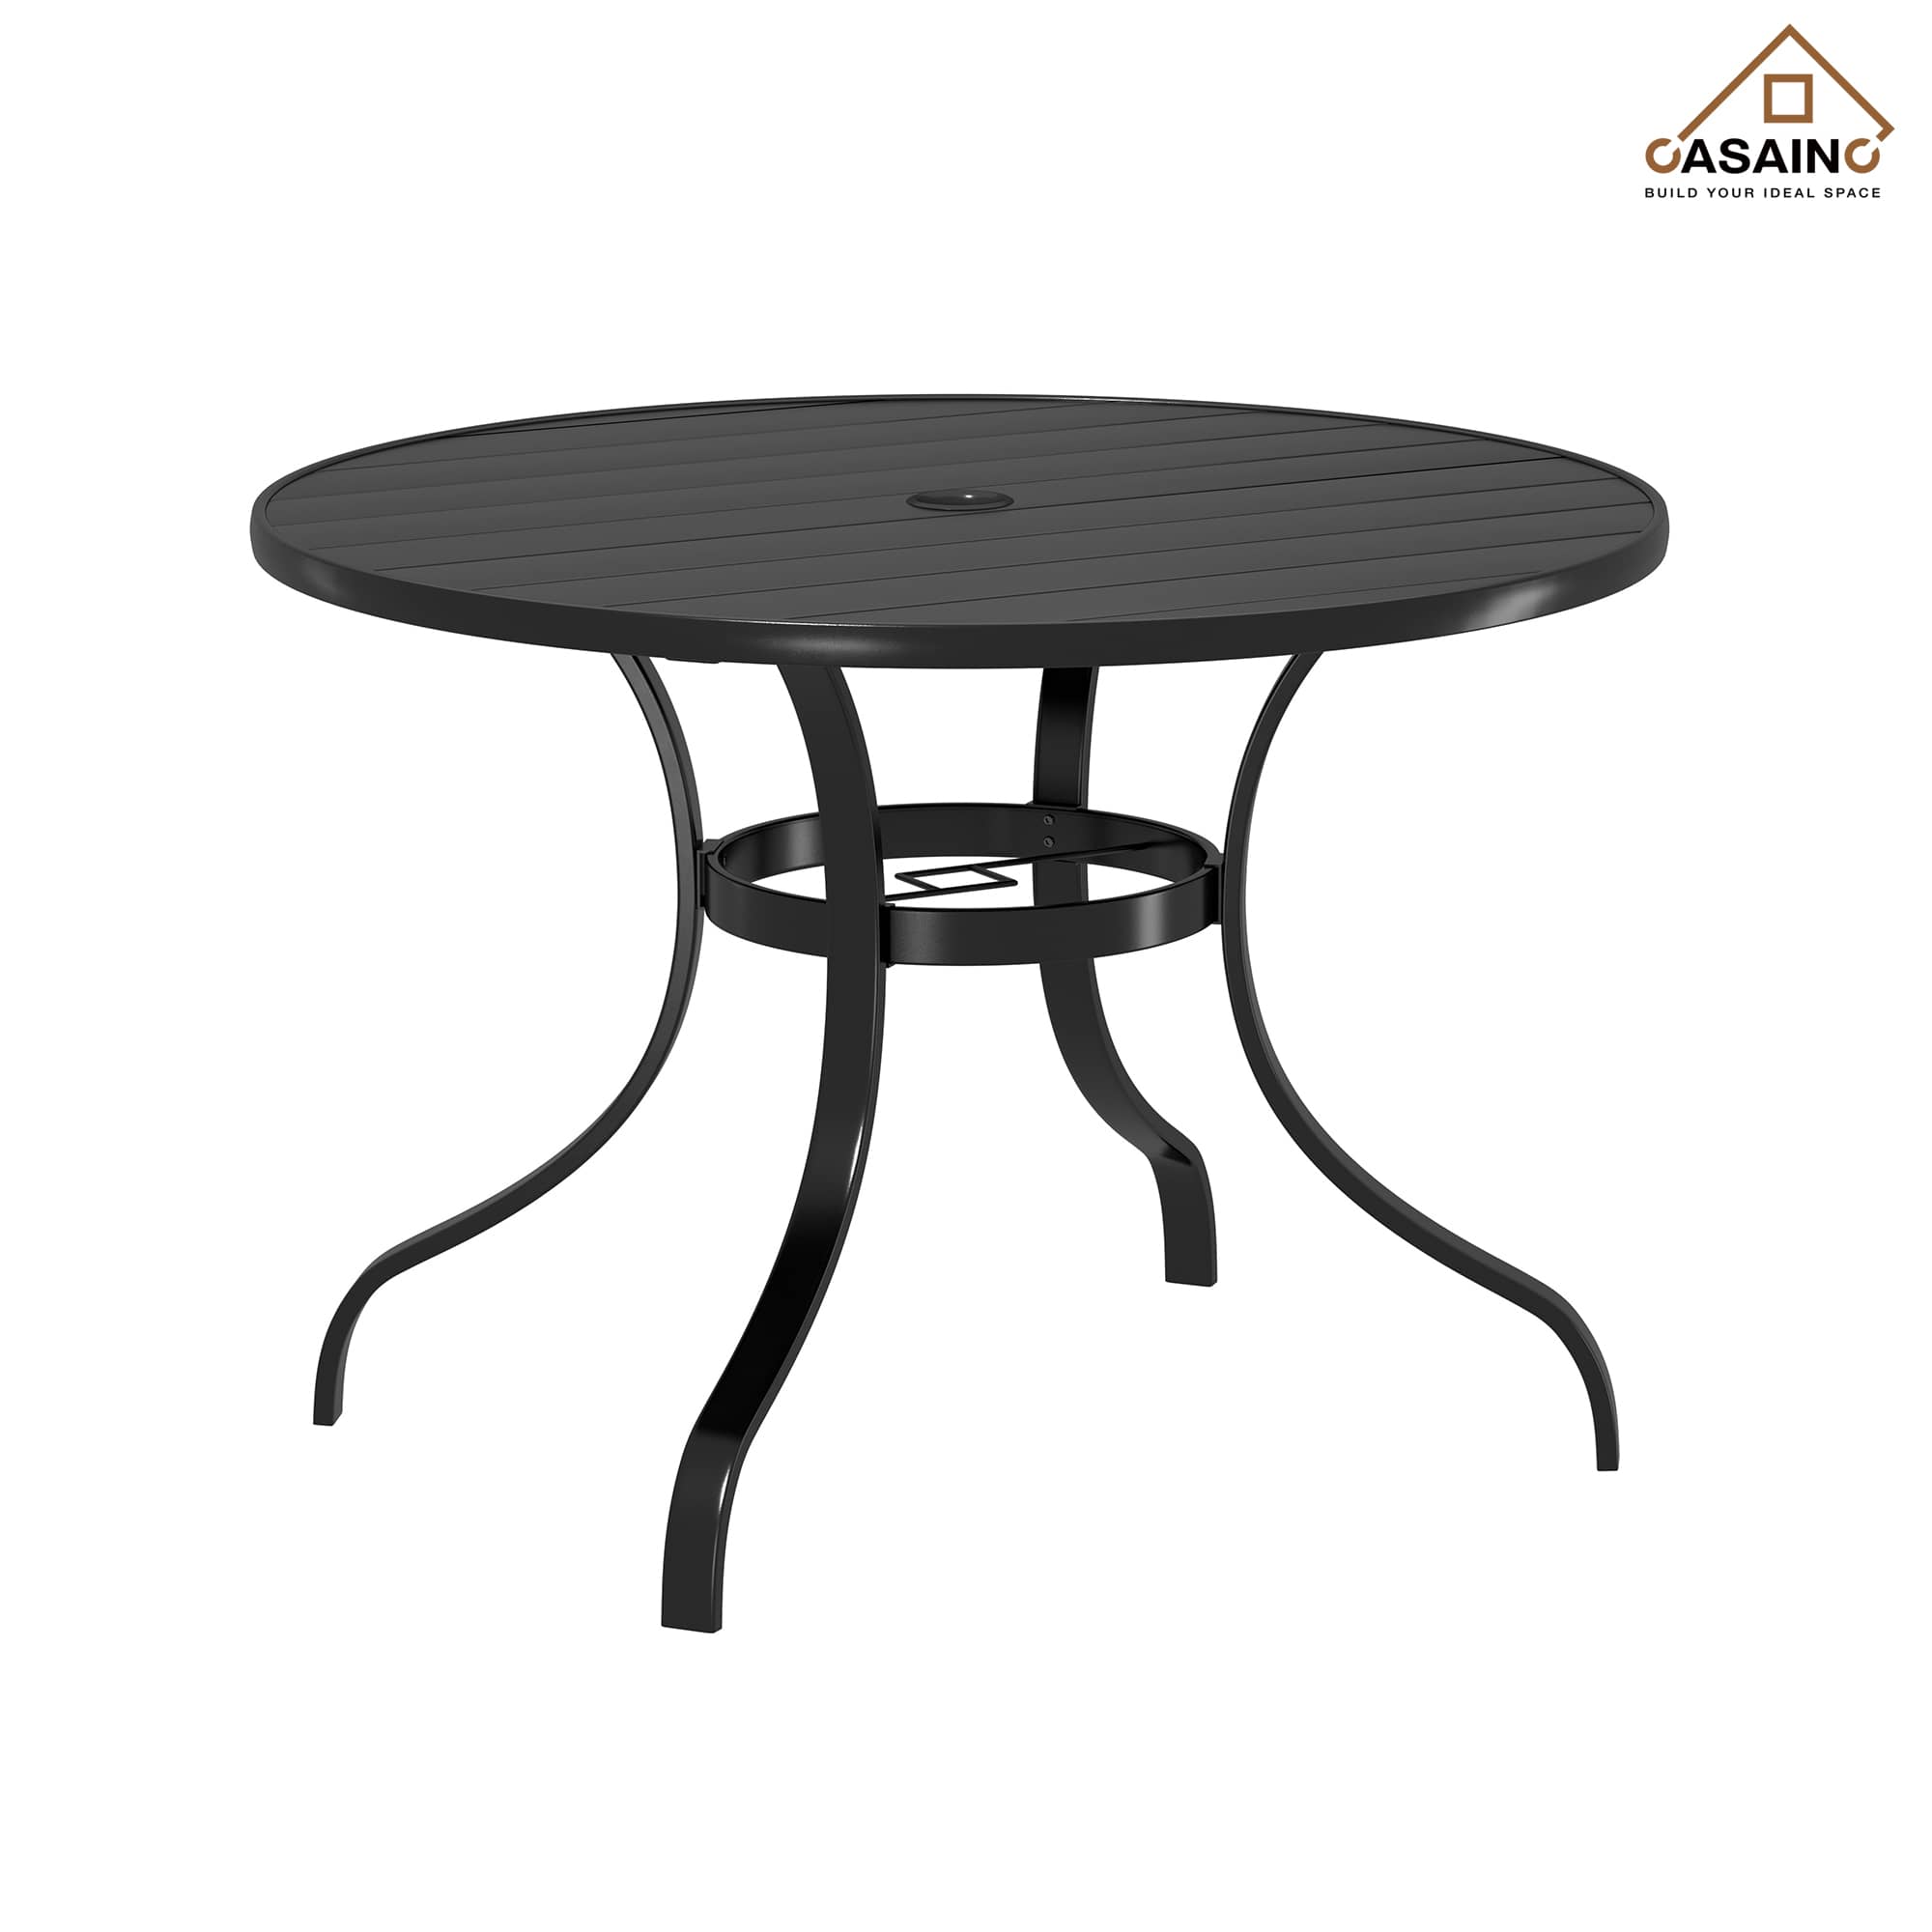 Round Outdoor Dining Table 40-in W x 40-in L with Umbrella Hole